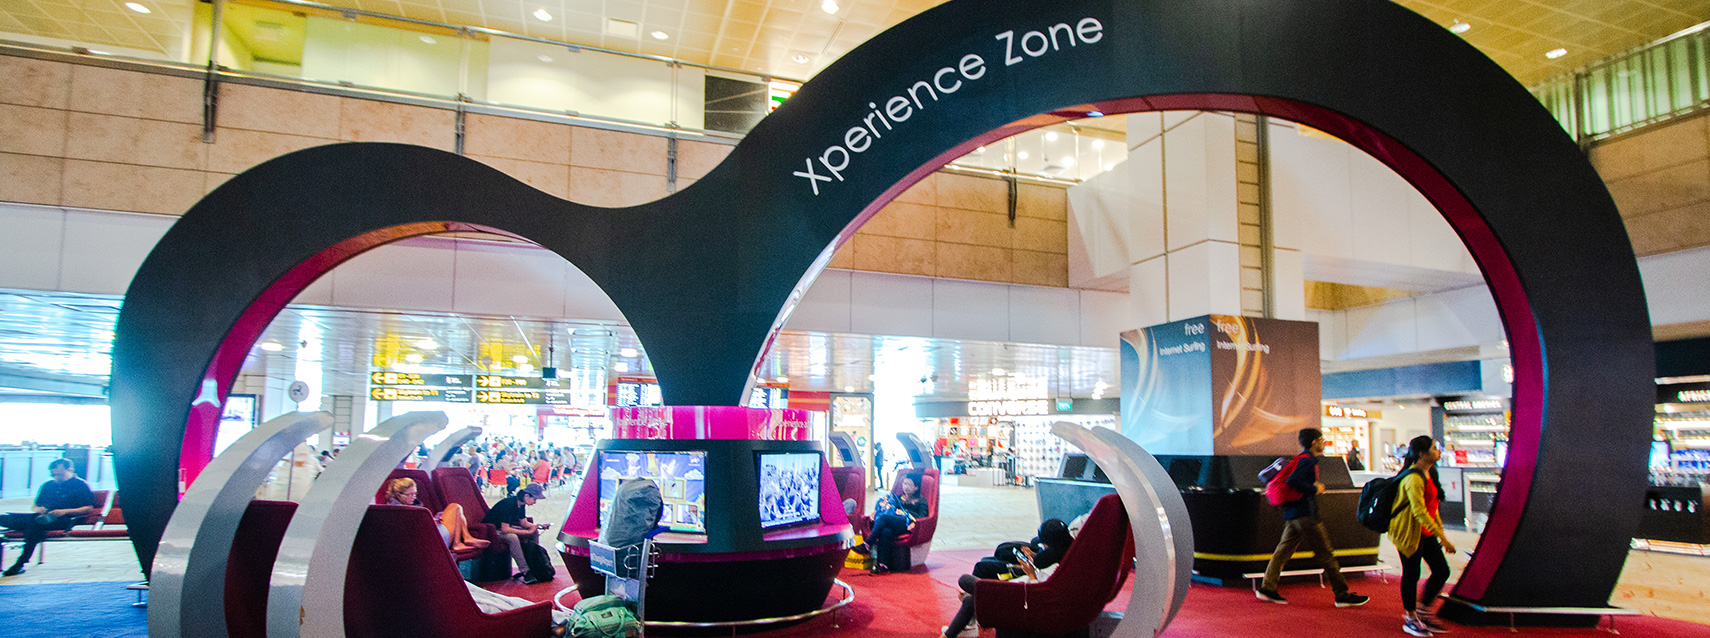 Xperience Zone